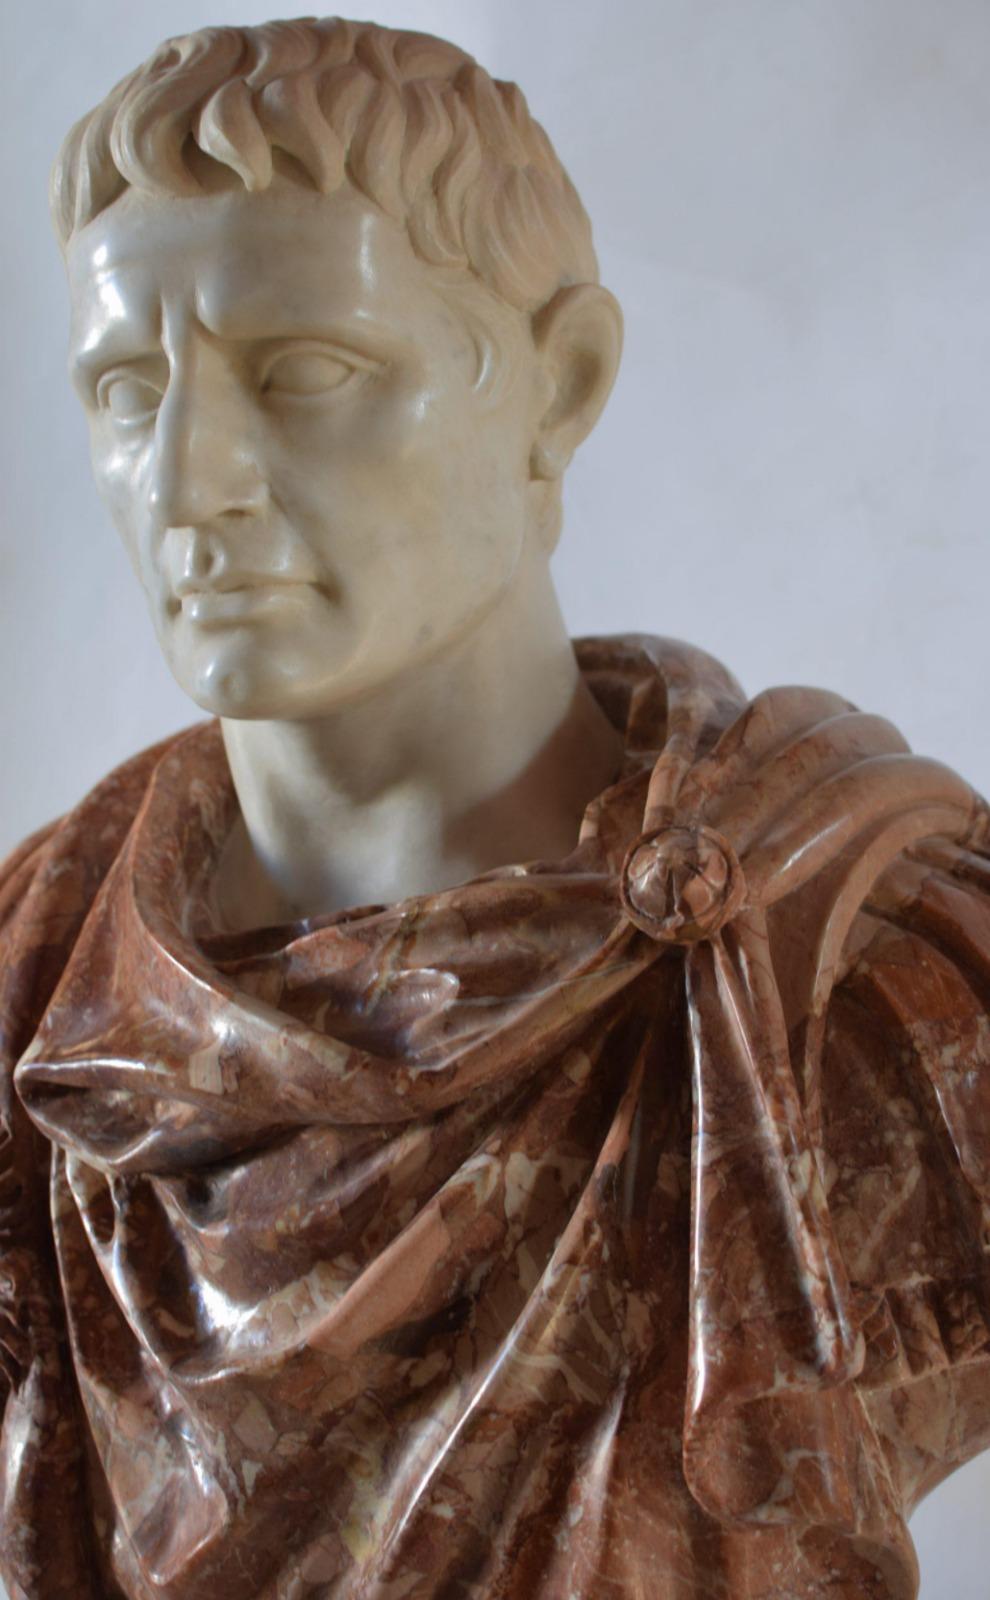 Bust of Octavian Augustus in Breccia Pernice and white Carrara Marble 
placed on a turned base in white Carrara marble 
height 73 cm base included, 
weight 80 kg 
Italy
73x55x28cm
Good condition - used with small signs of aging and blemishes